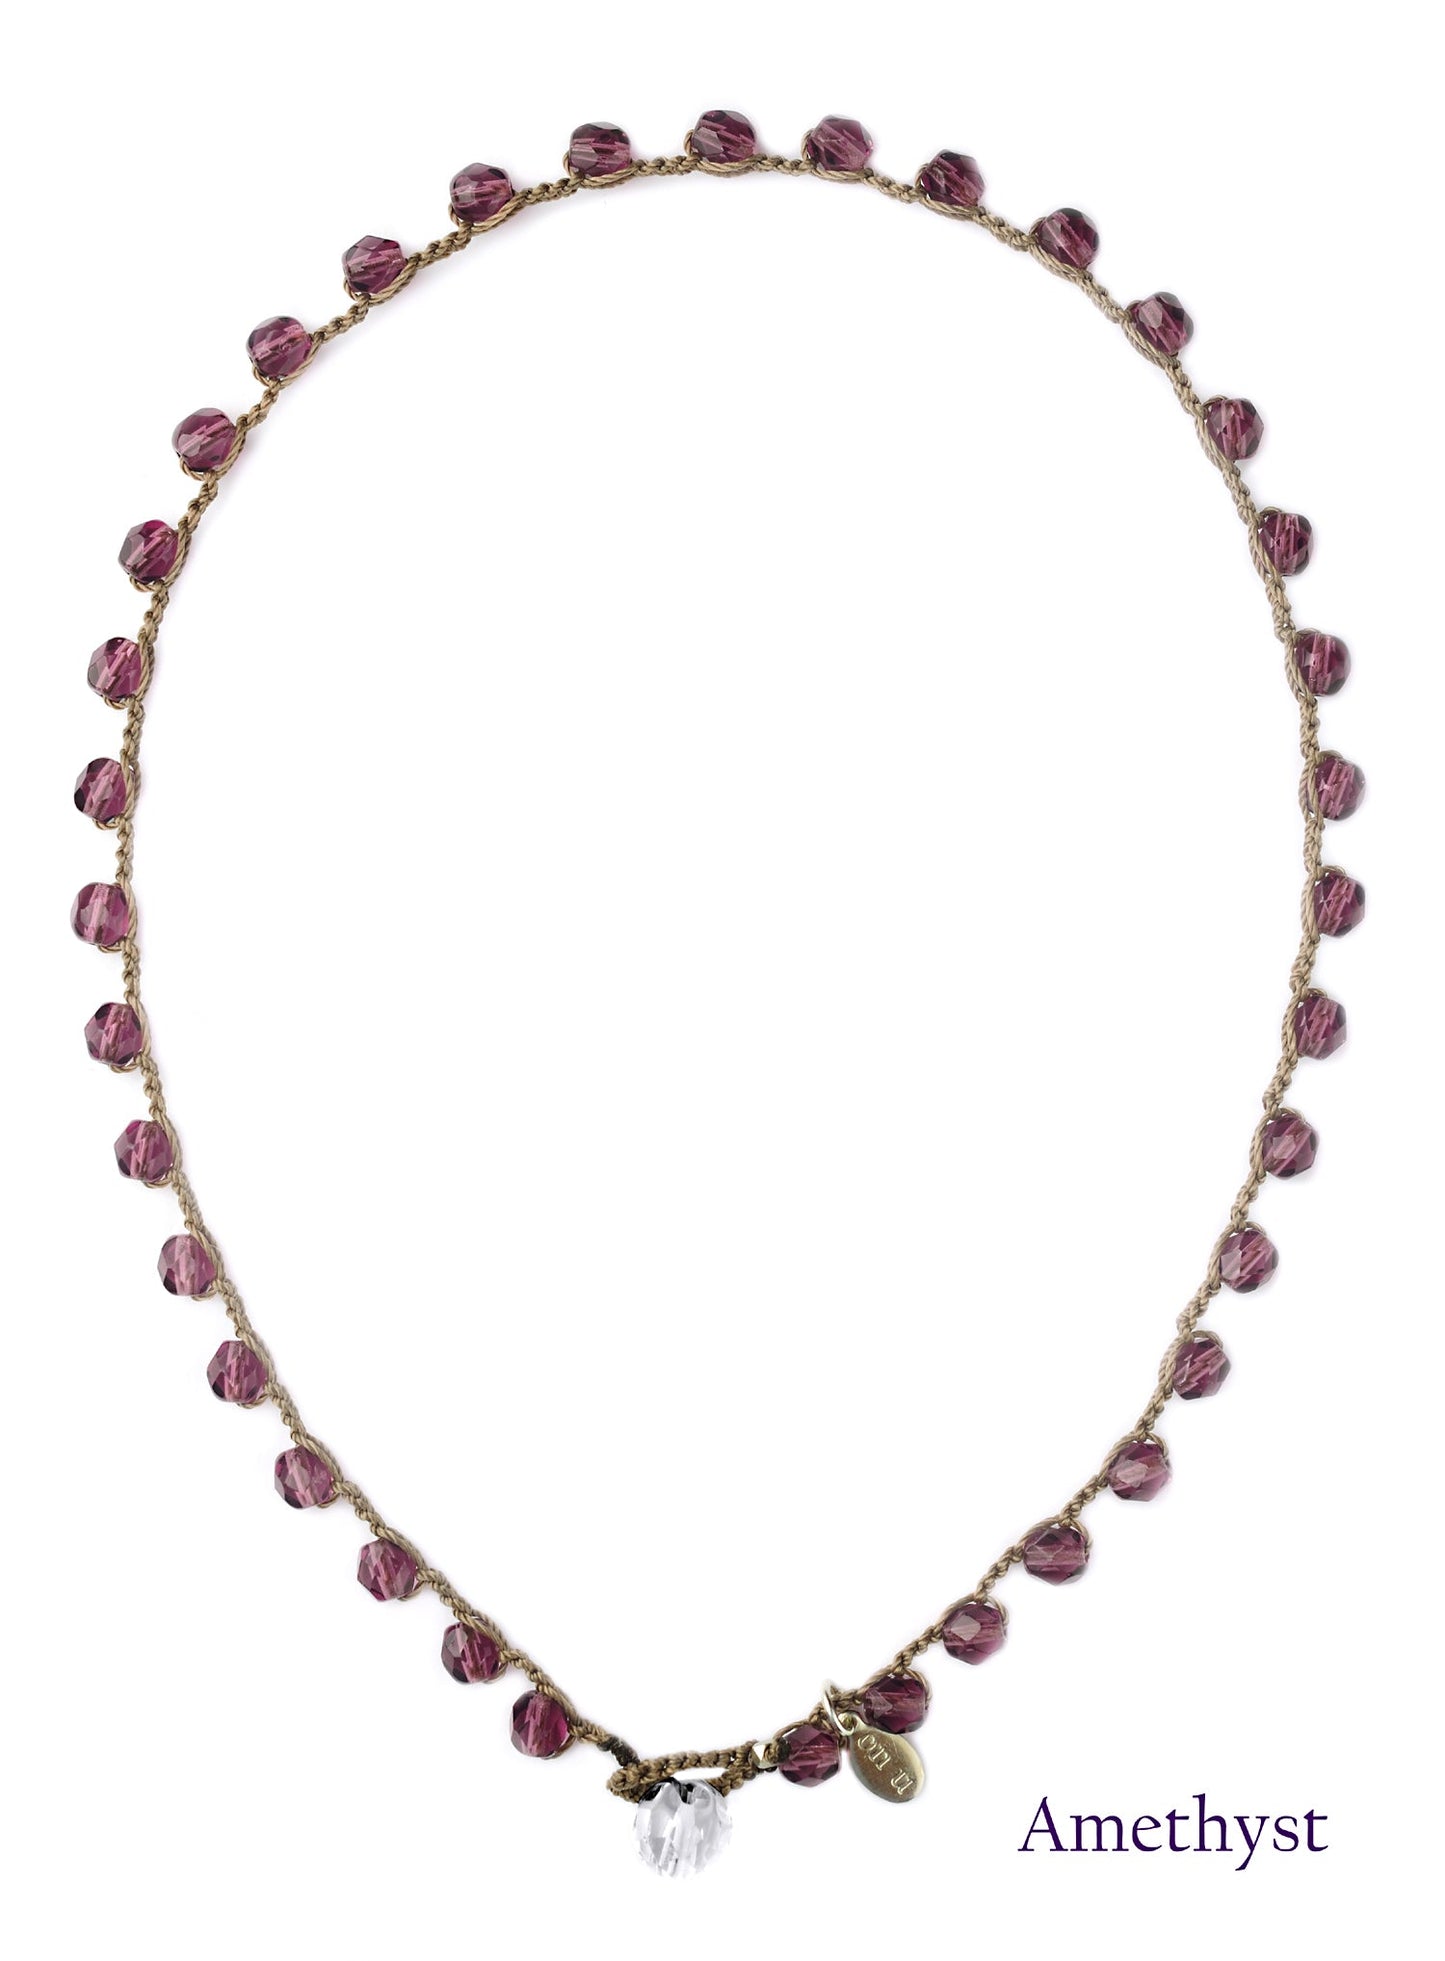 onujewelry.com - Large Bead Dot Necklace in Amethyst.  Designed, and created, by Donna Silvestri, On U Jewelry, Richmond, VA